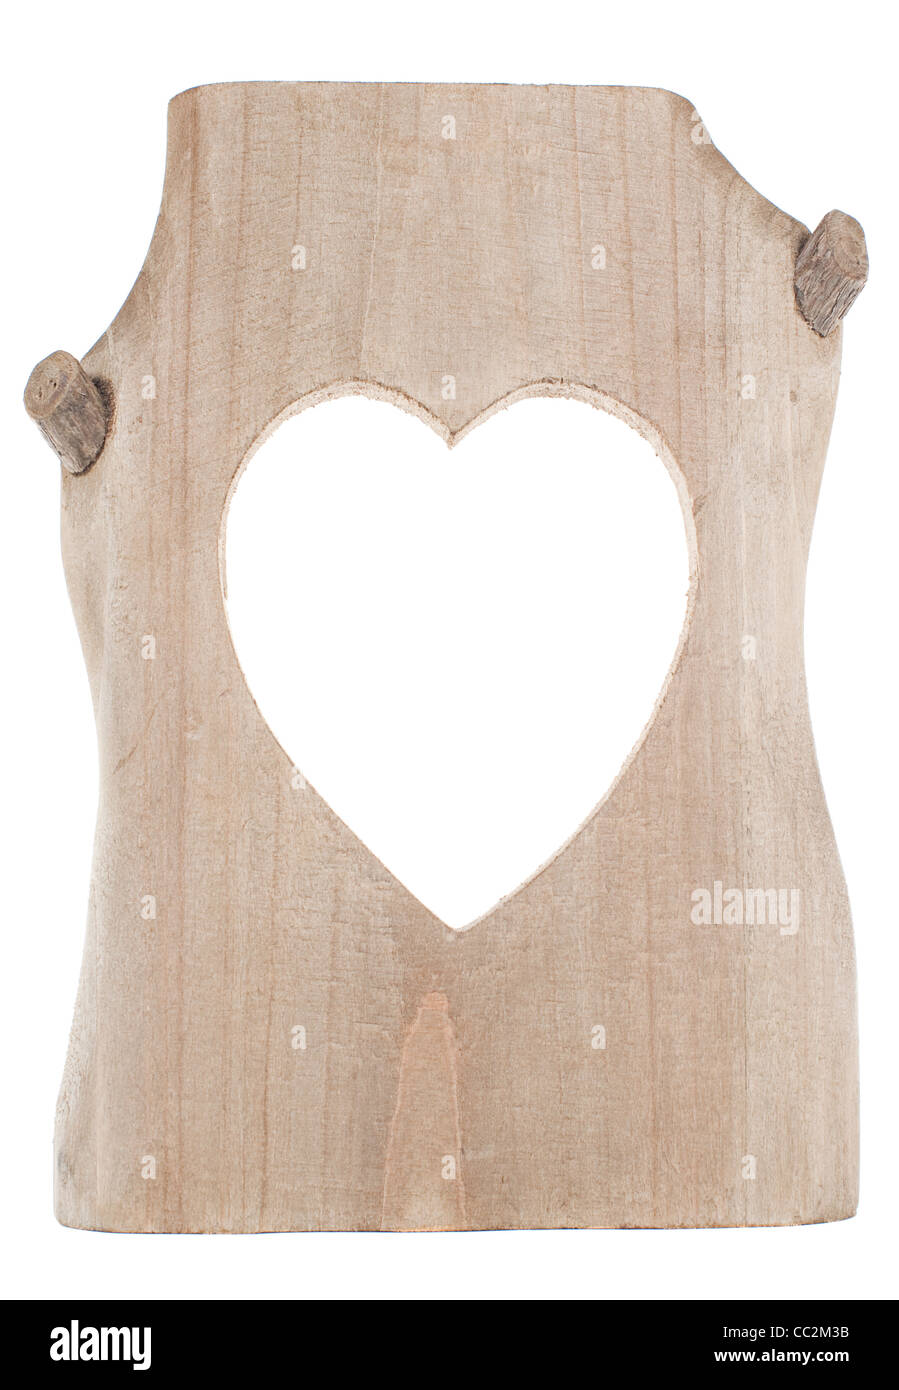 Piece of wood with heart shape cutout Stock Photo